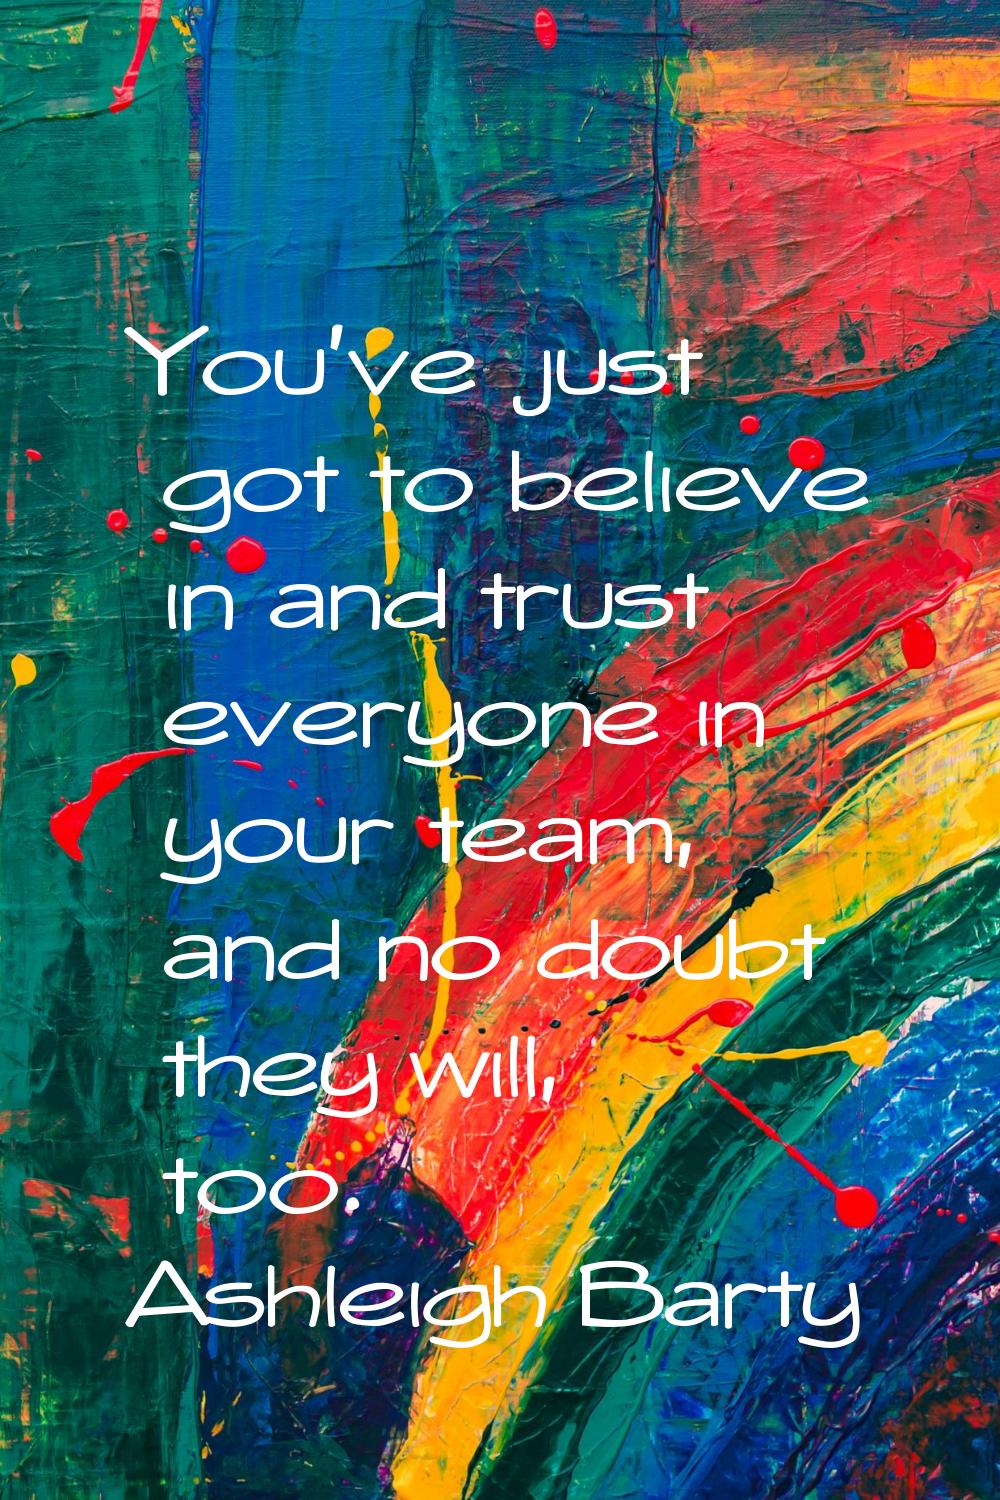 You've just got to believe in and trust everyone in your team, and no doubt they will, too.